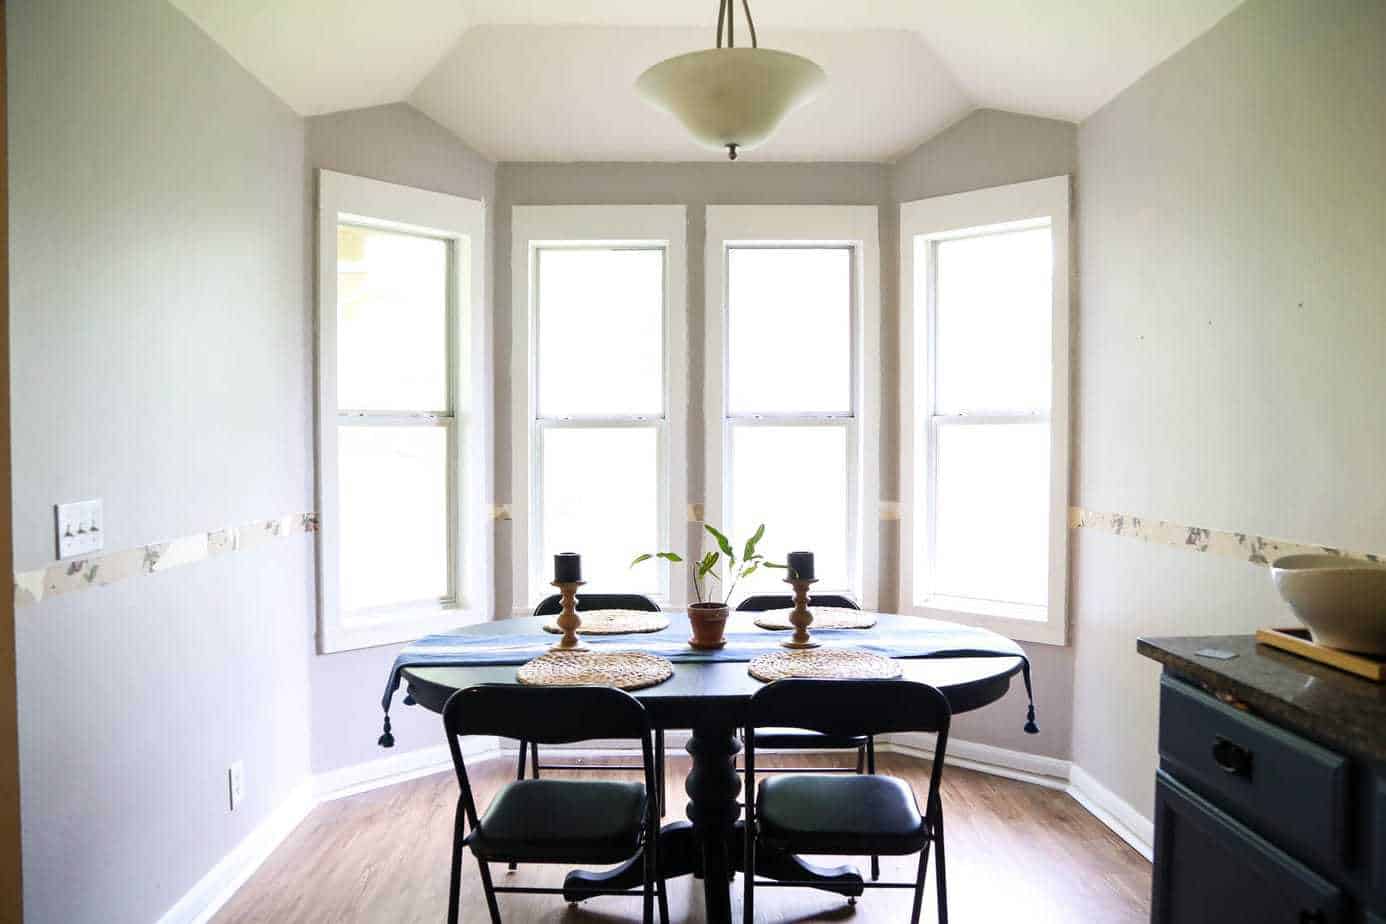 Dining room with DIY window trim and a hidden trash can